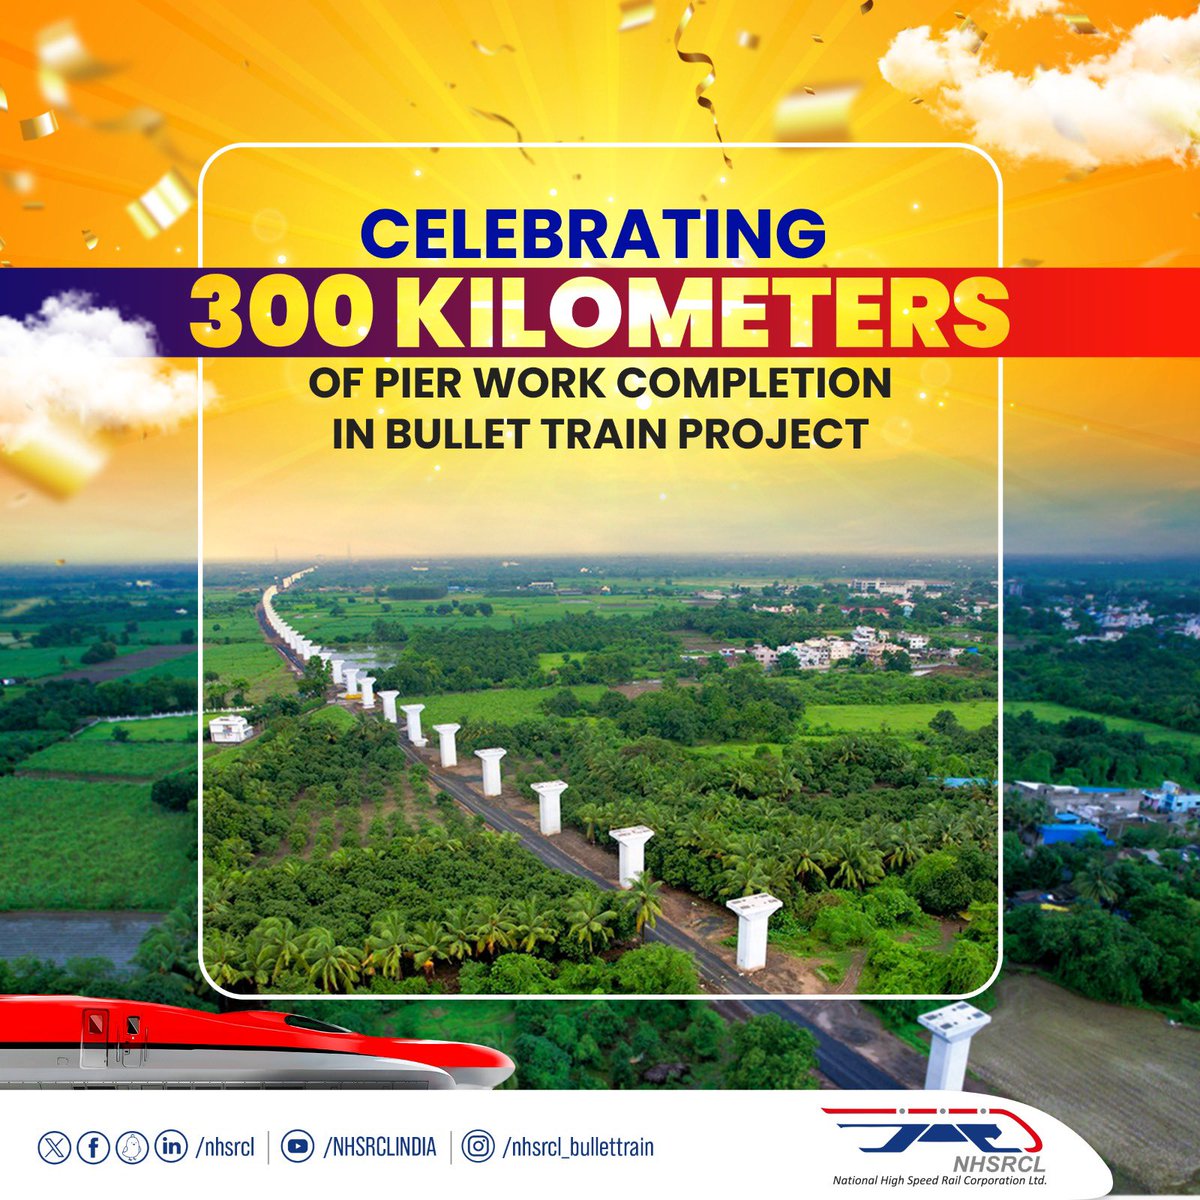 Milestone Achieved! 🚀 NHSRCL is thrilled to announce completion of 300 km pier work on the Mumbai-Ahmedabad bullet train project. Every kilometer counts as we pave the way for tomorrow's travel. Full steam ahead on the journey to future.